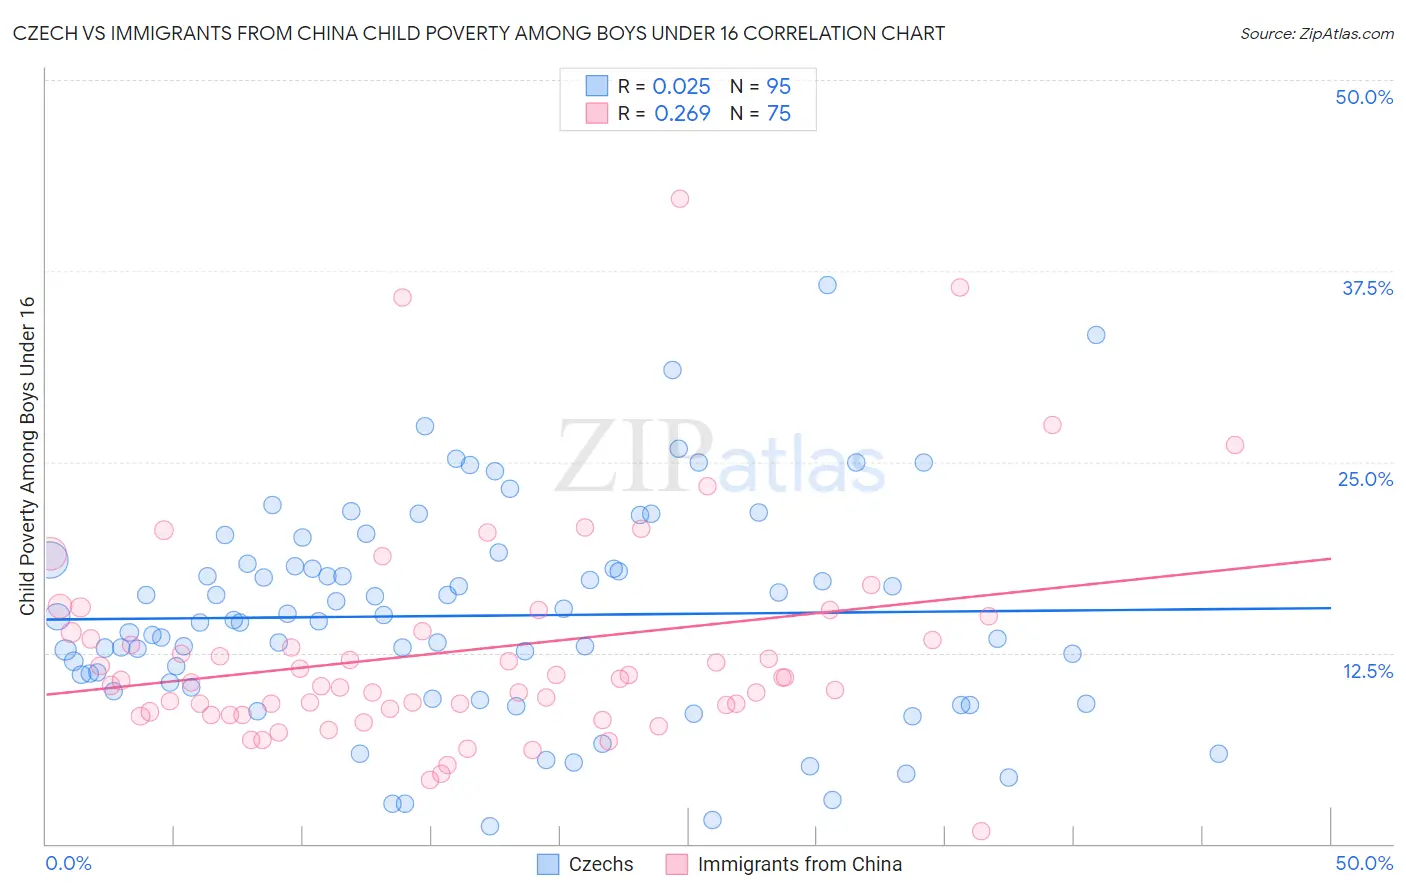 Czech vs Immigrants from China Child Poverty Among Boys Under 16